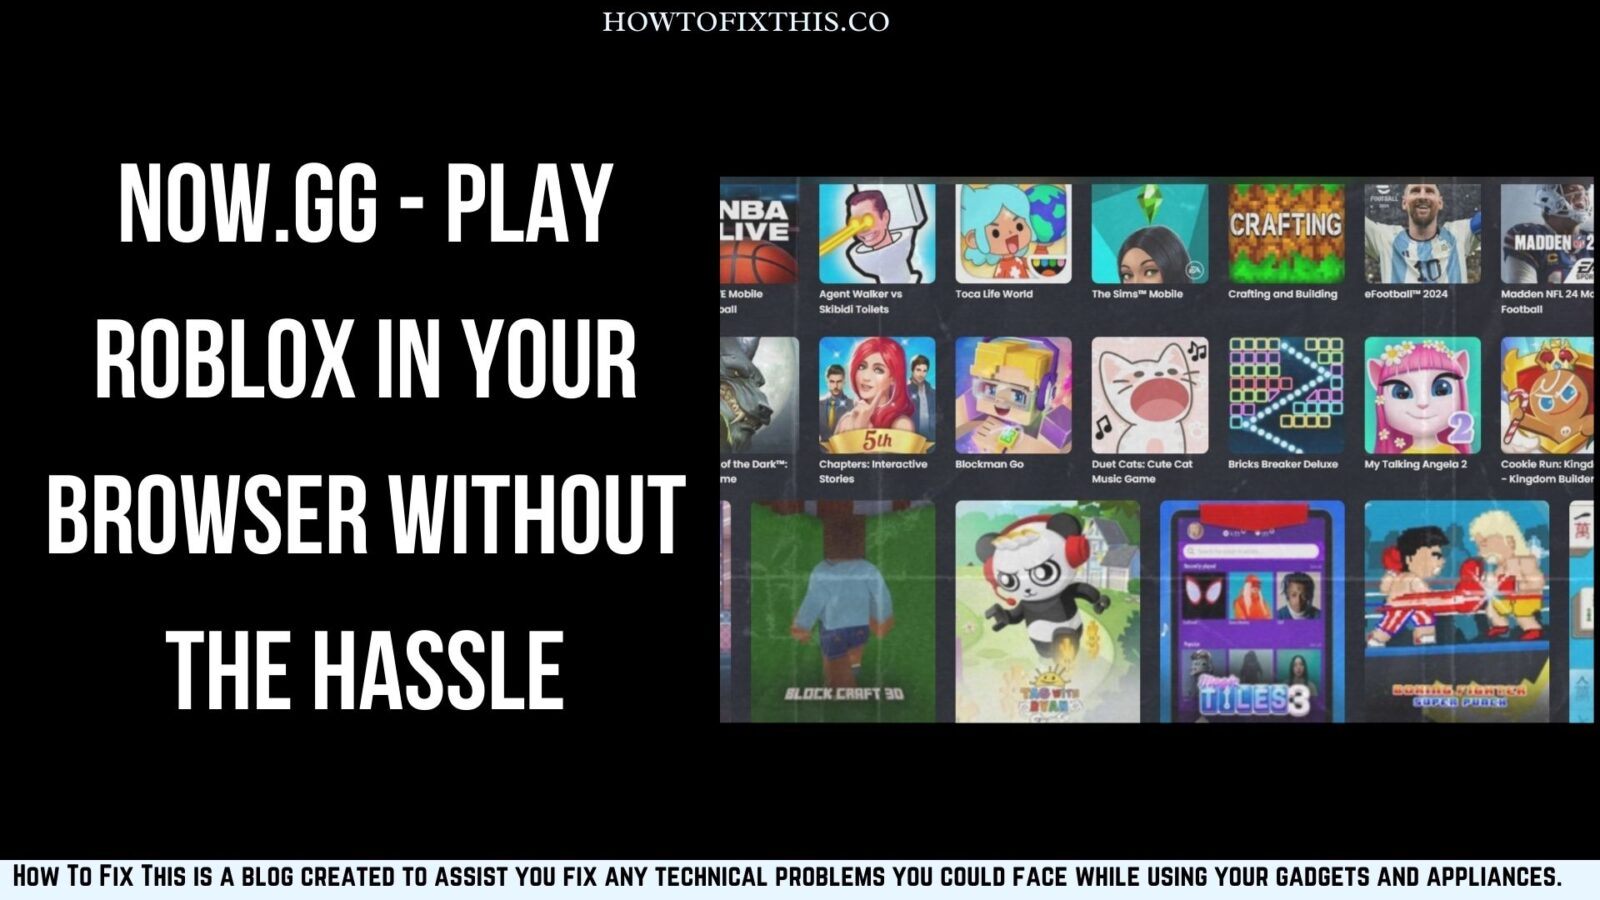 Now.gg – Play Roblox in Your Browser Without the Hassle